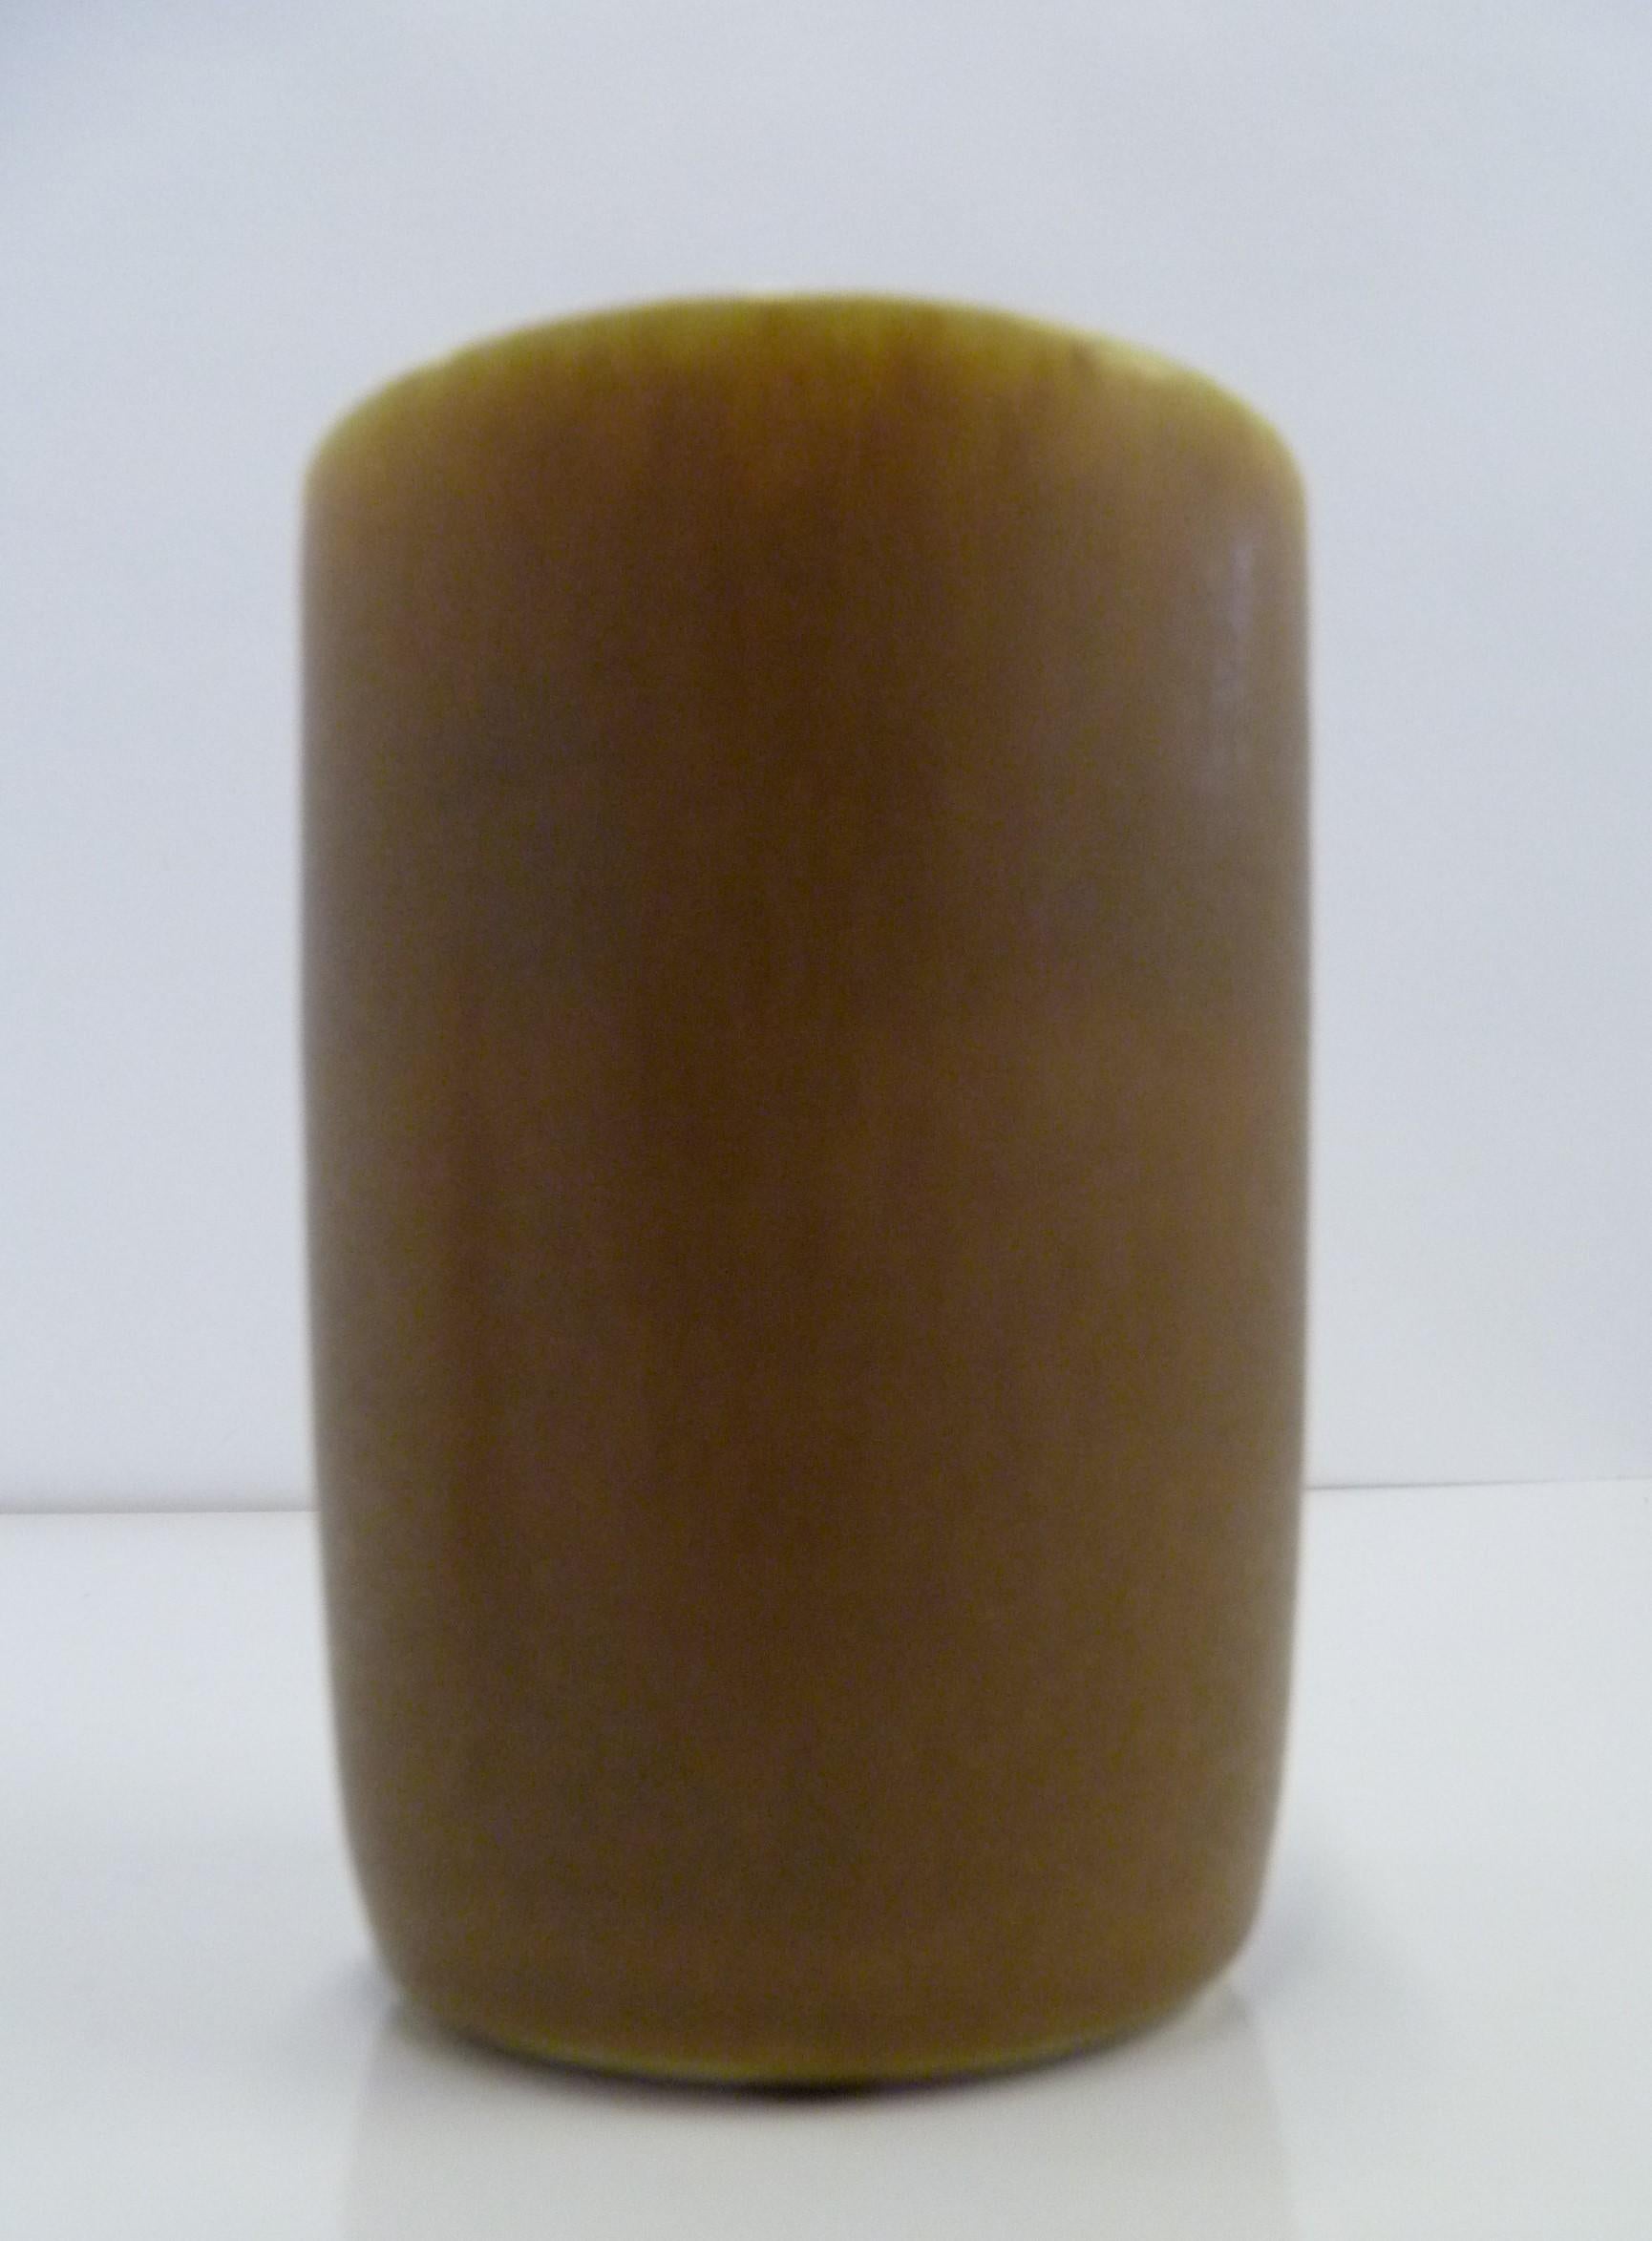 Scandinavian Mid-Century Modern Danish hand thrown pottery vase by Per and Annelise Linnemann-Schmidt for Palshus from the 1960s. Lovely simple shape with a soft smooth feel of the mottled tan glaze over a cream colored body. In excellent condition,